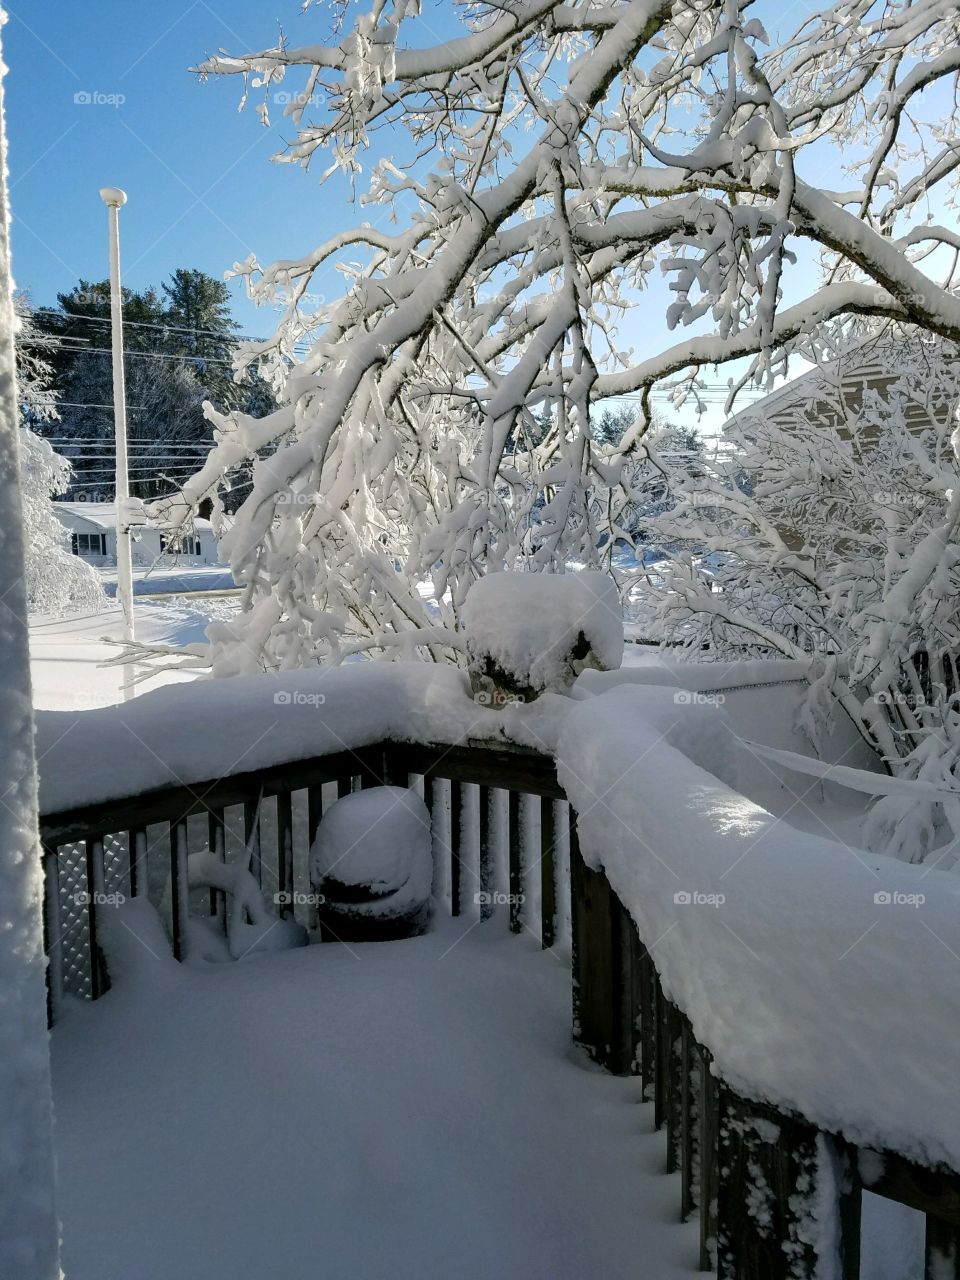 Winter is coming! 1st snowstorm with snow frozen to trees, fences, grass, lawn & roads.